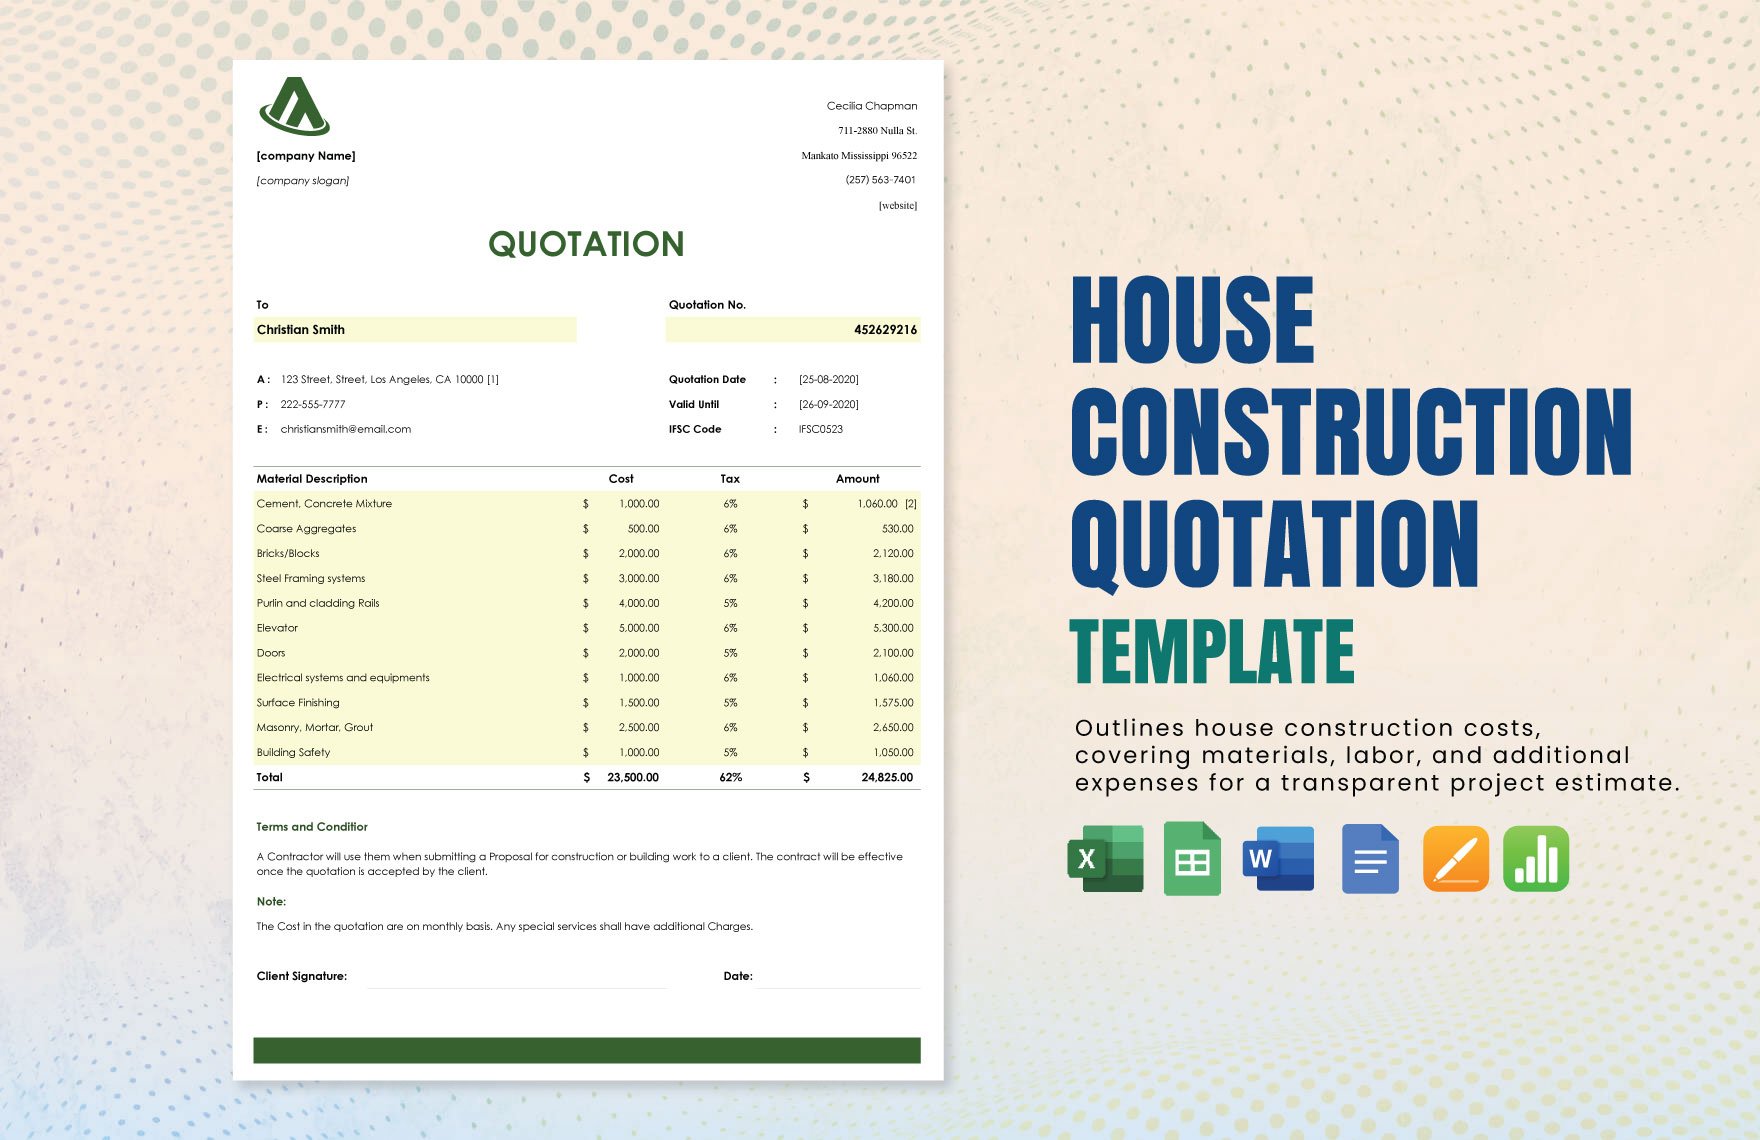 House Construction Quotation in Word, Google Docs, Excel, Google Sheets, Apple Pages, Apple Numbers